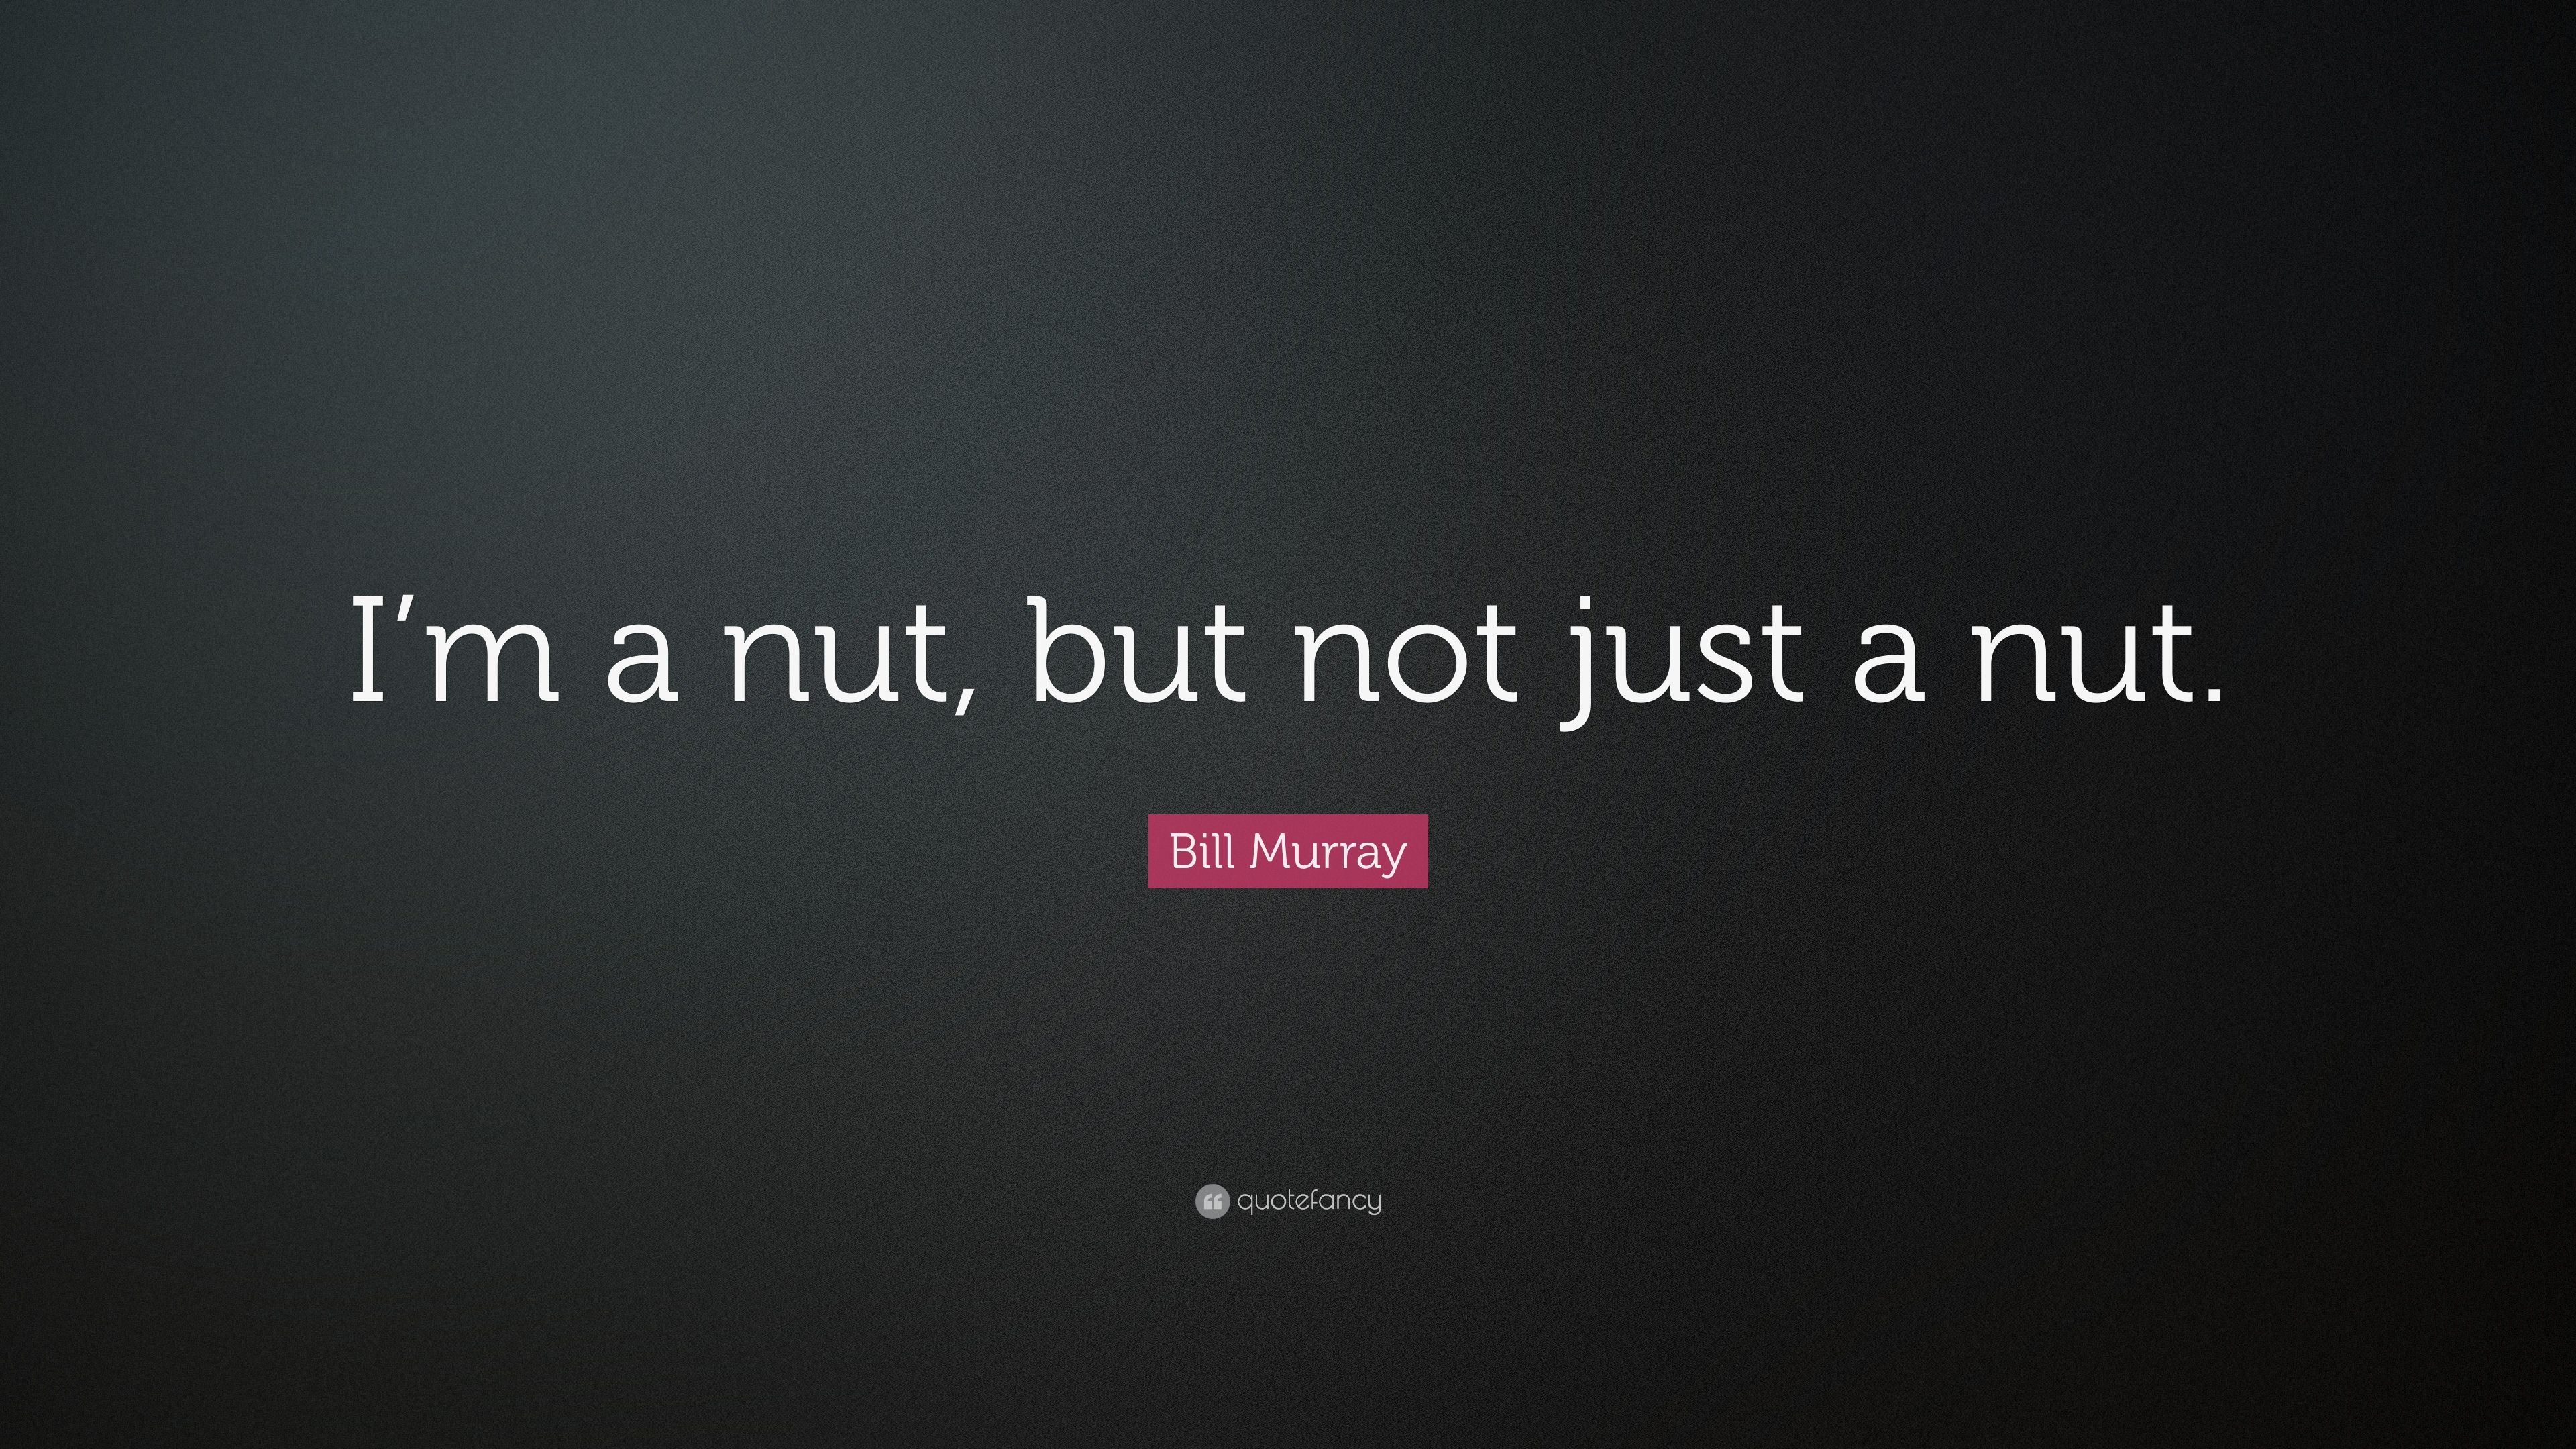 Bill Murray Quote: “I'm a nut, but not just a nut.” 12 wallpaper